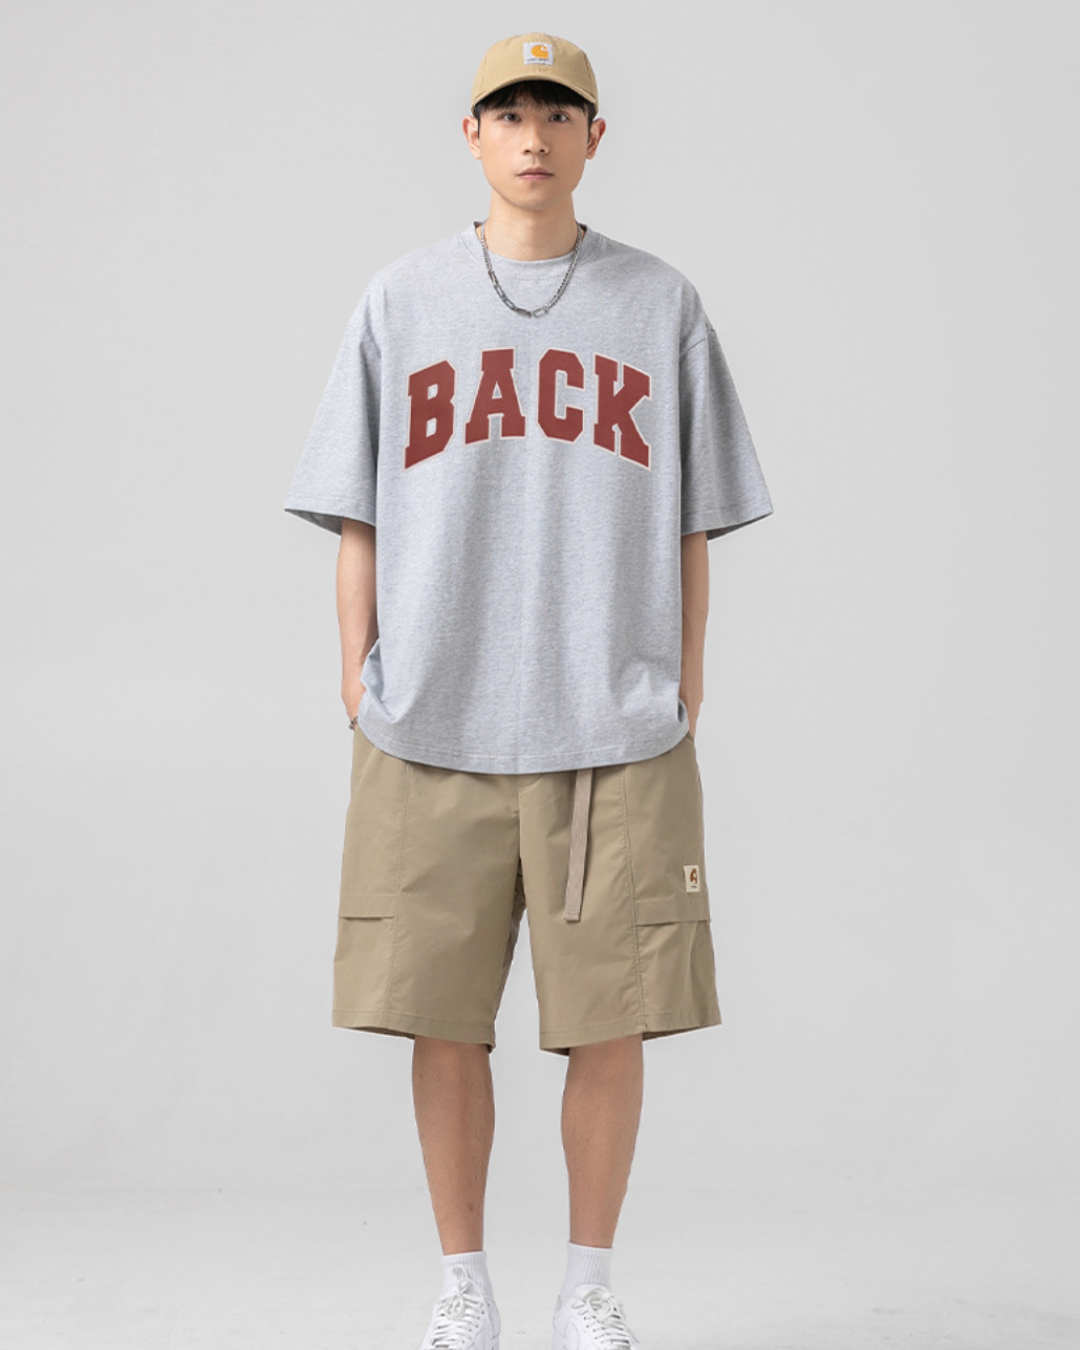 BACK Cotton Tee in Grey